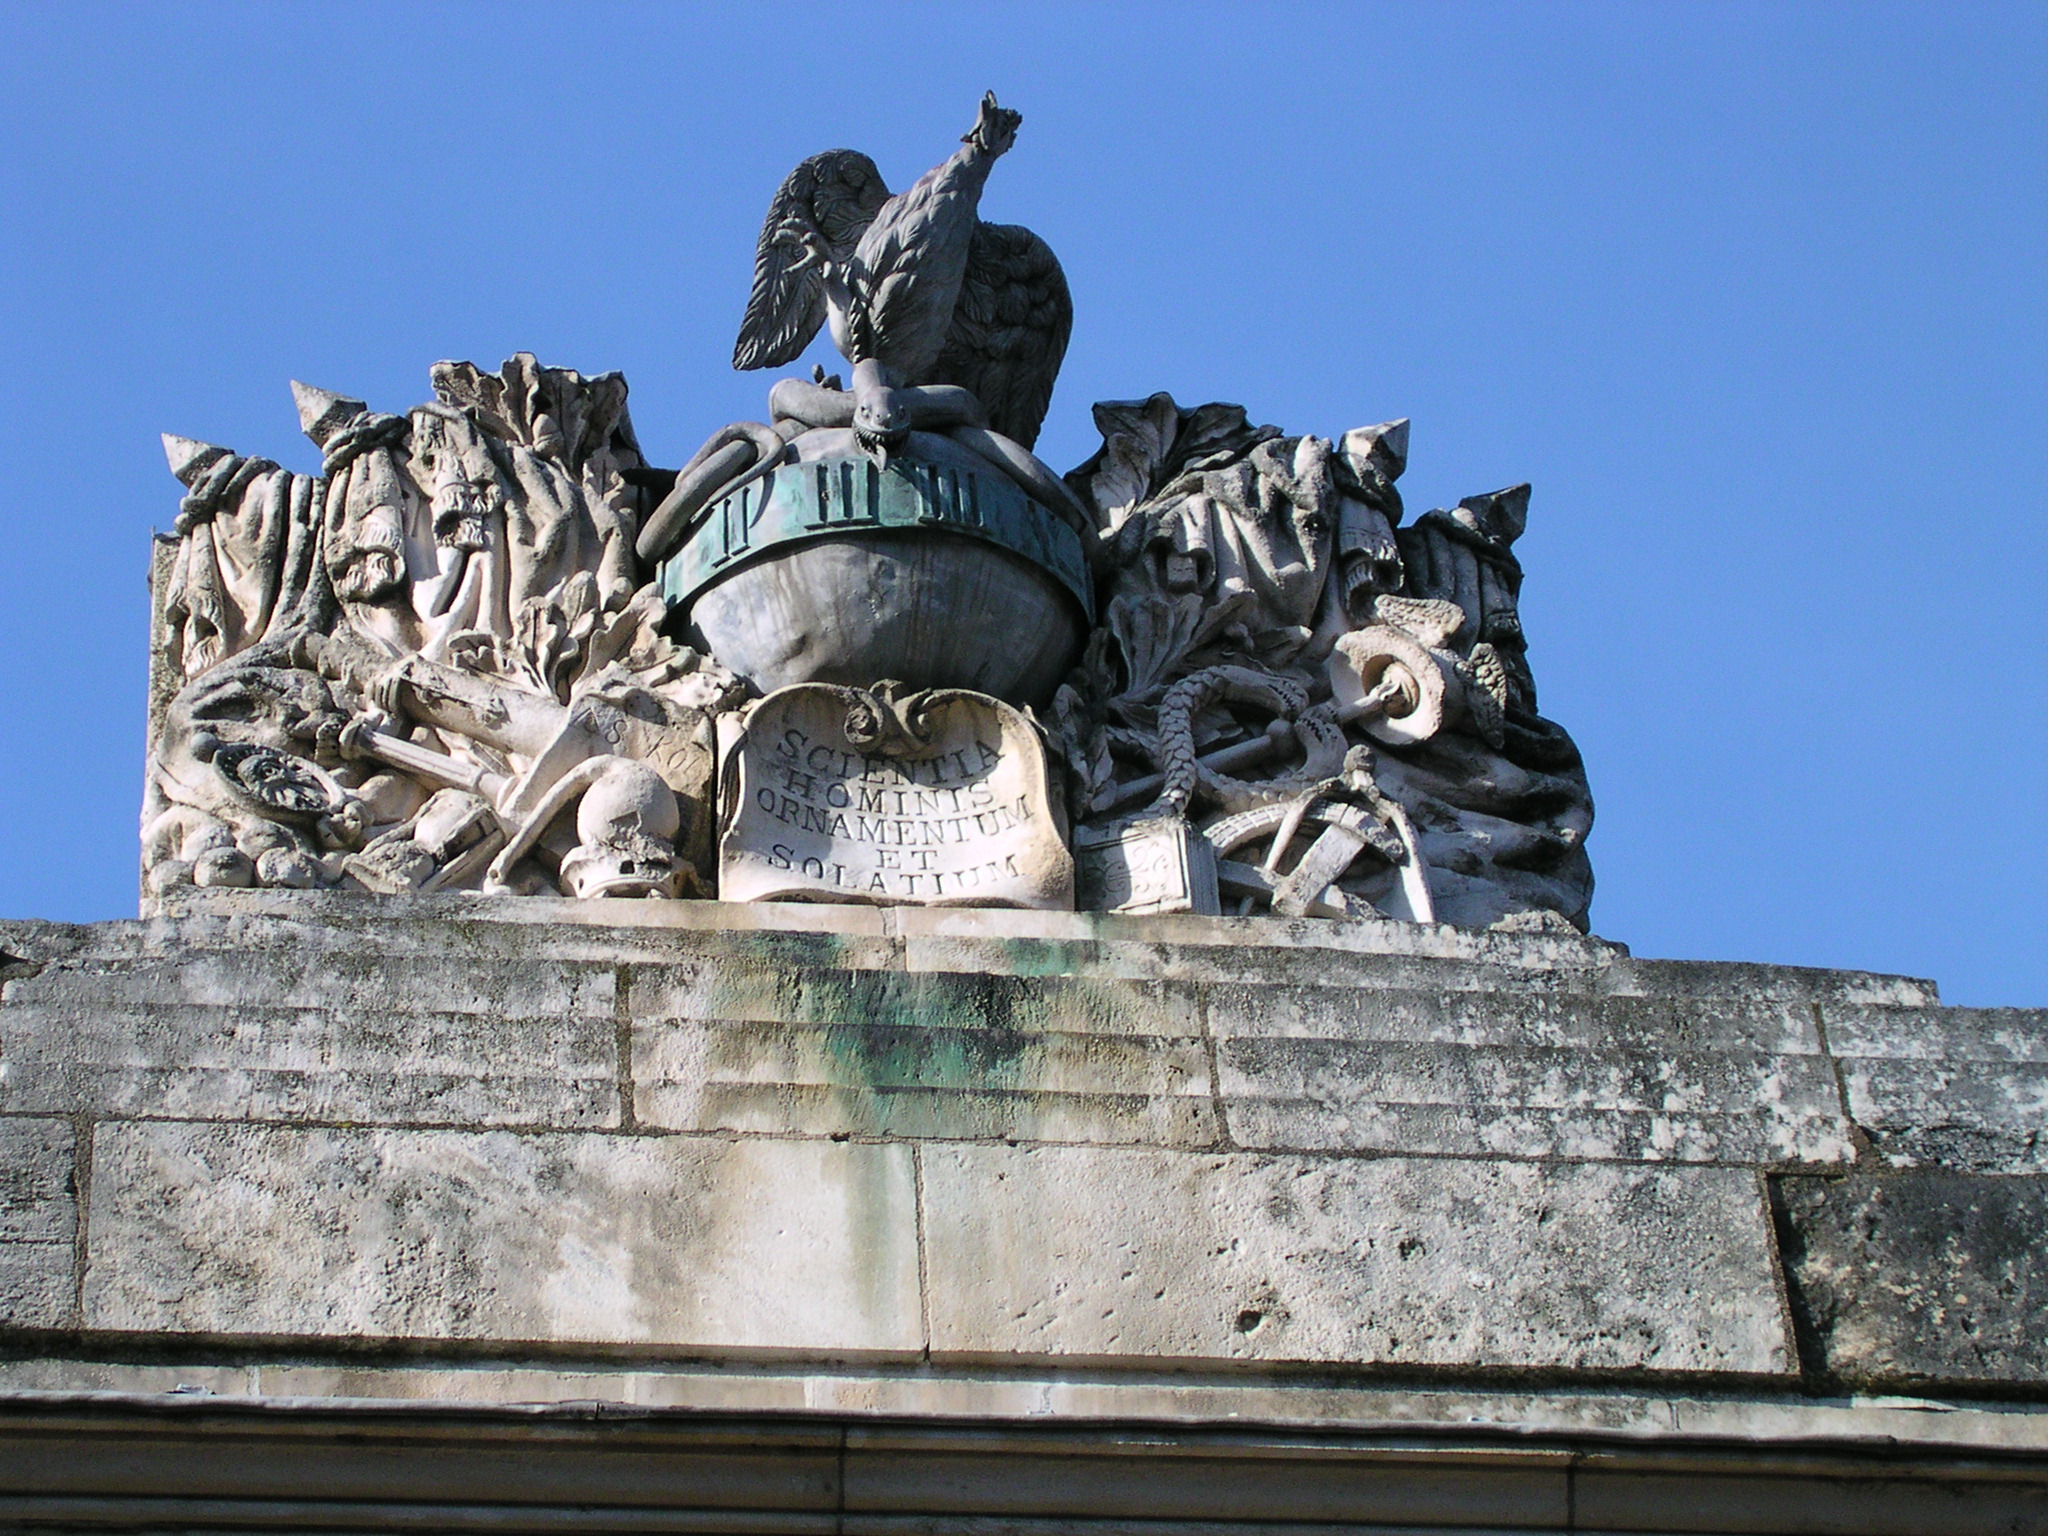 statues and ornaments on the top of a building